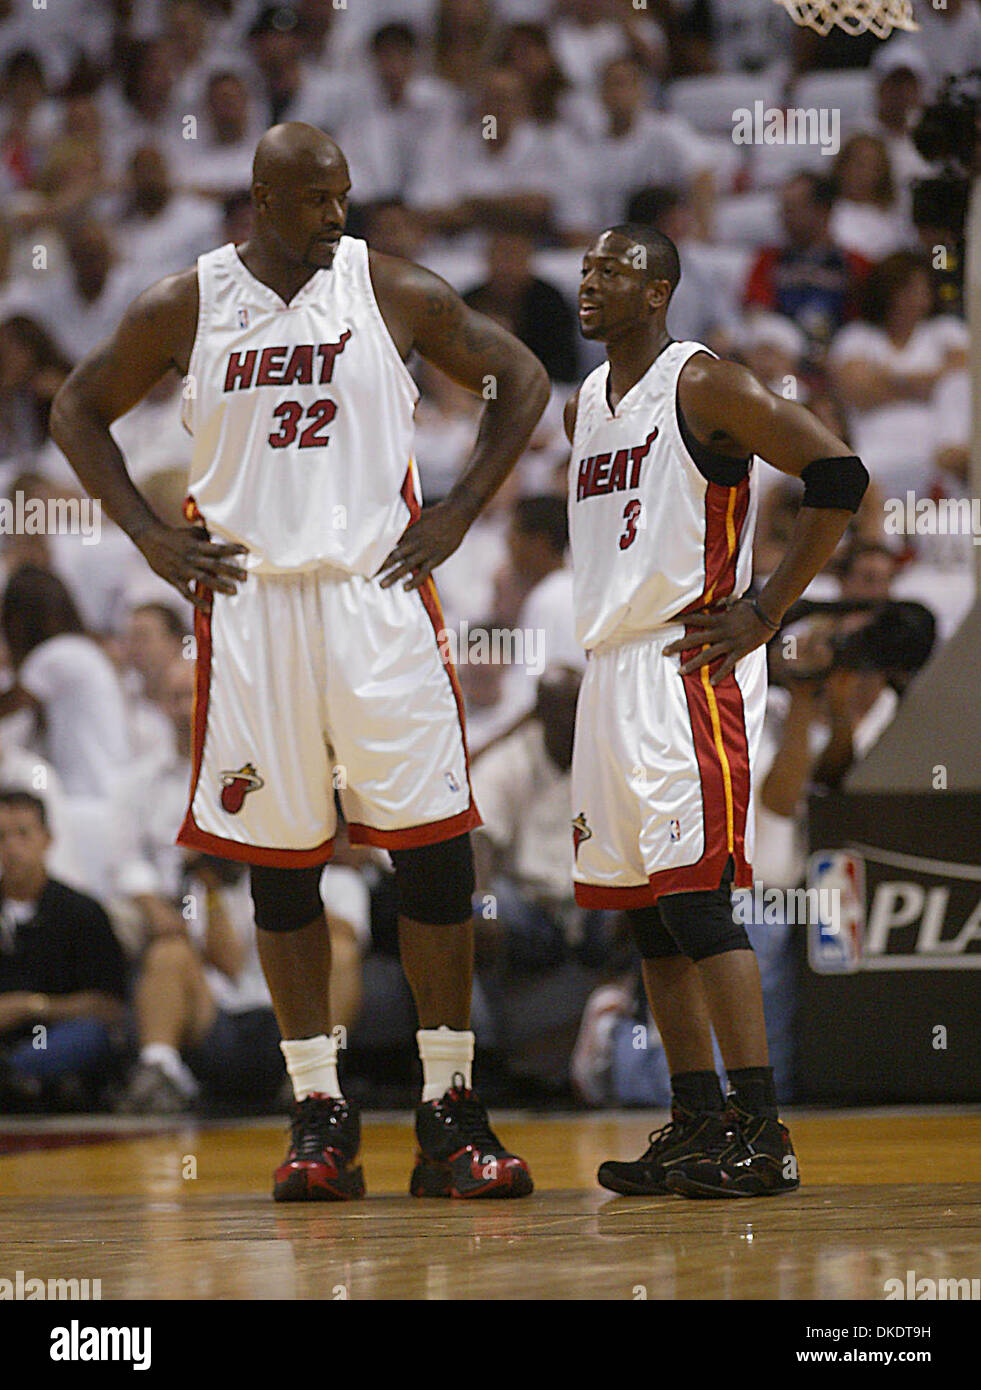 Apr 27, 2007 - Miami, FL, USA - SHAQUILLE O'NEAL and DWYANE WADE